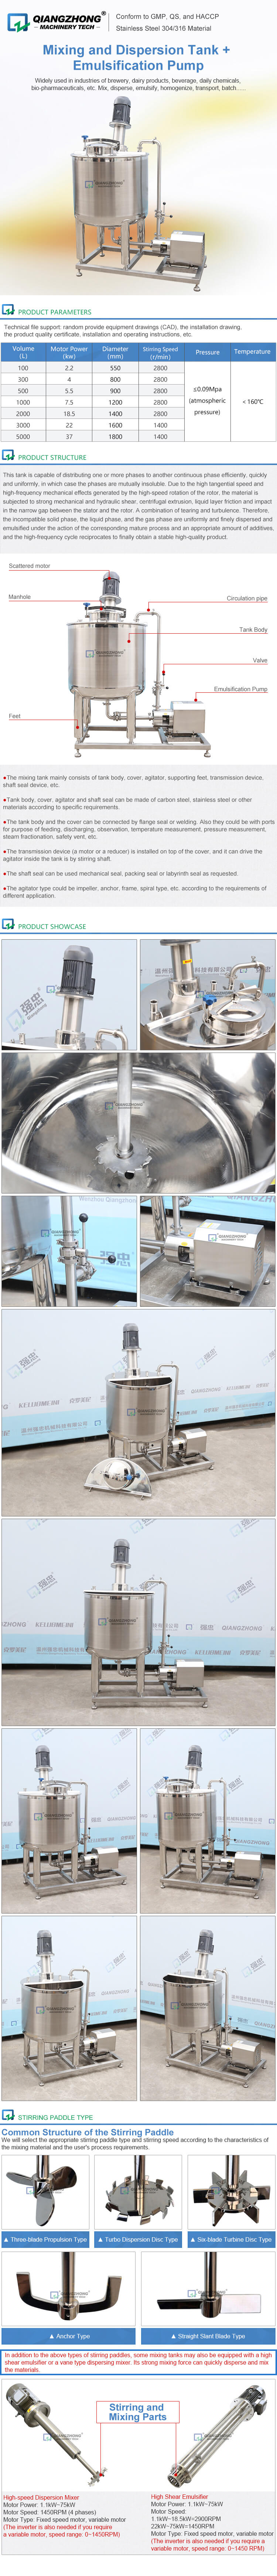 Mixing and Dispersion Tank Emulsification Pump